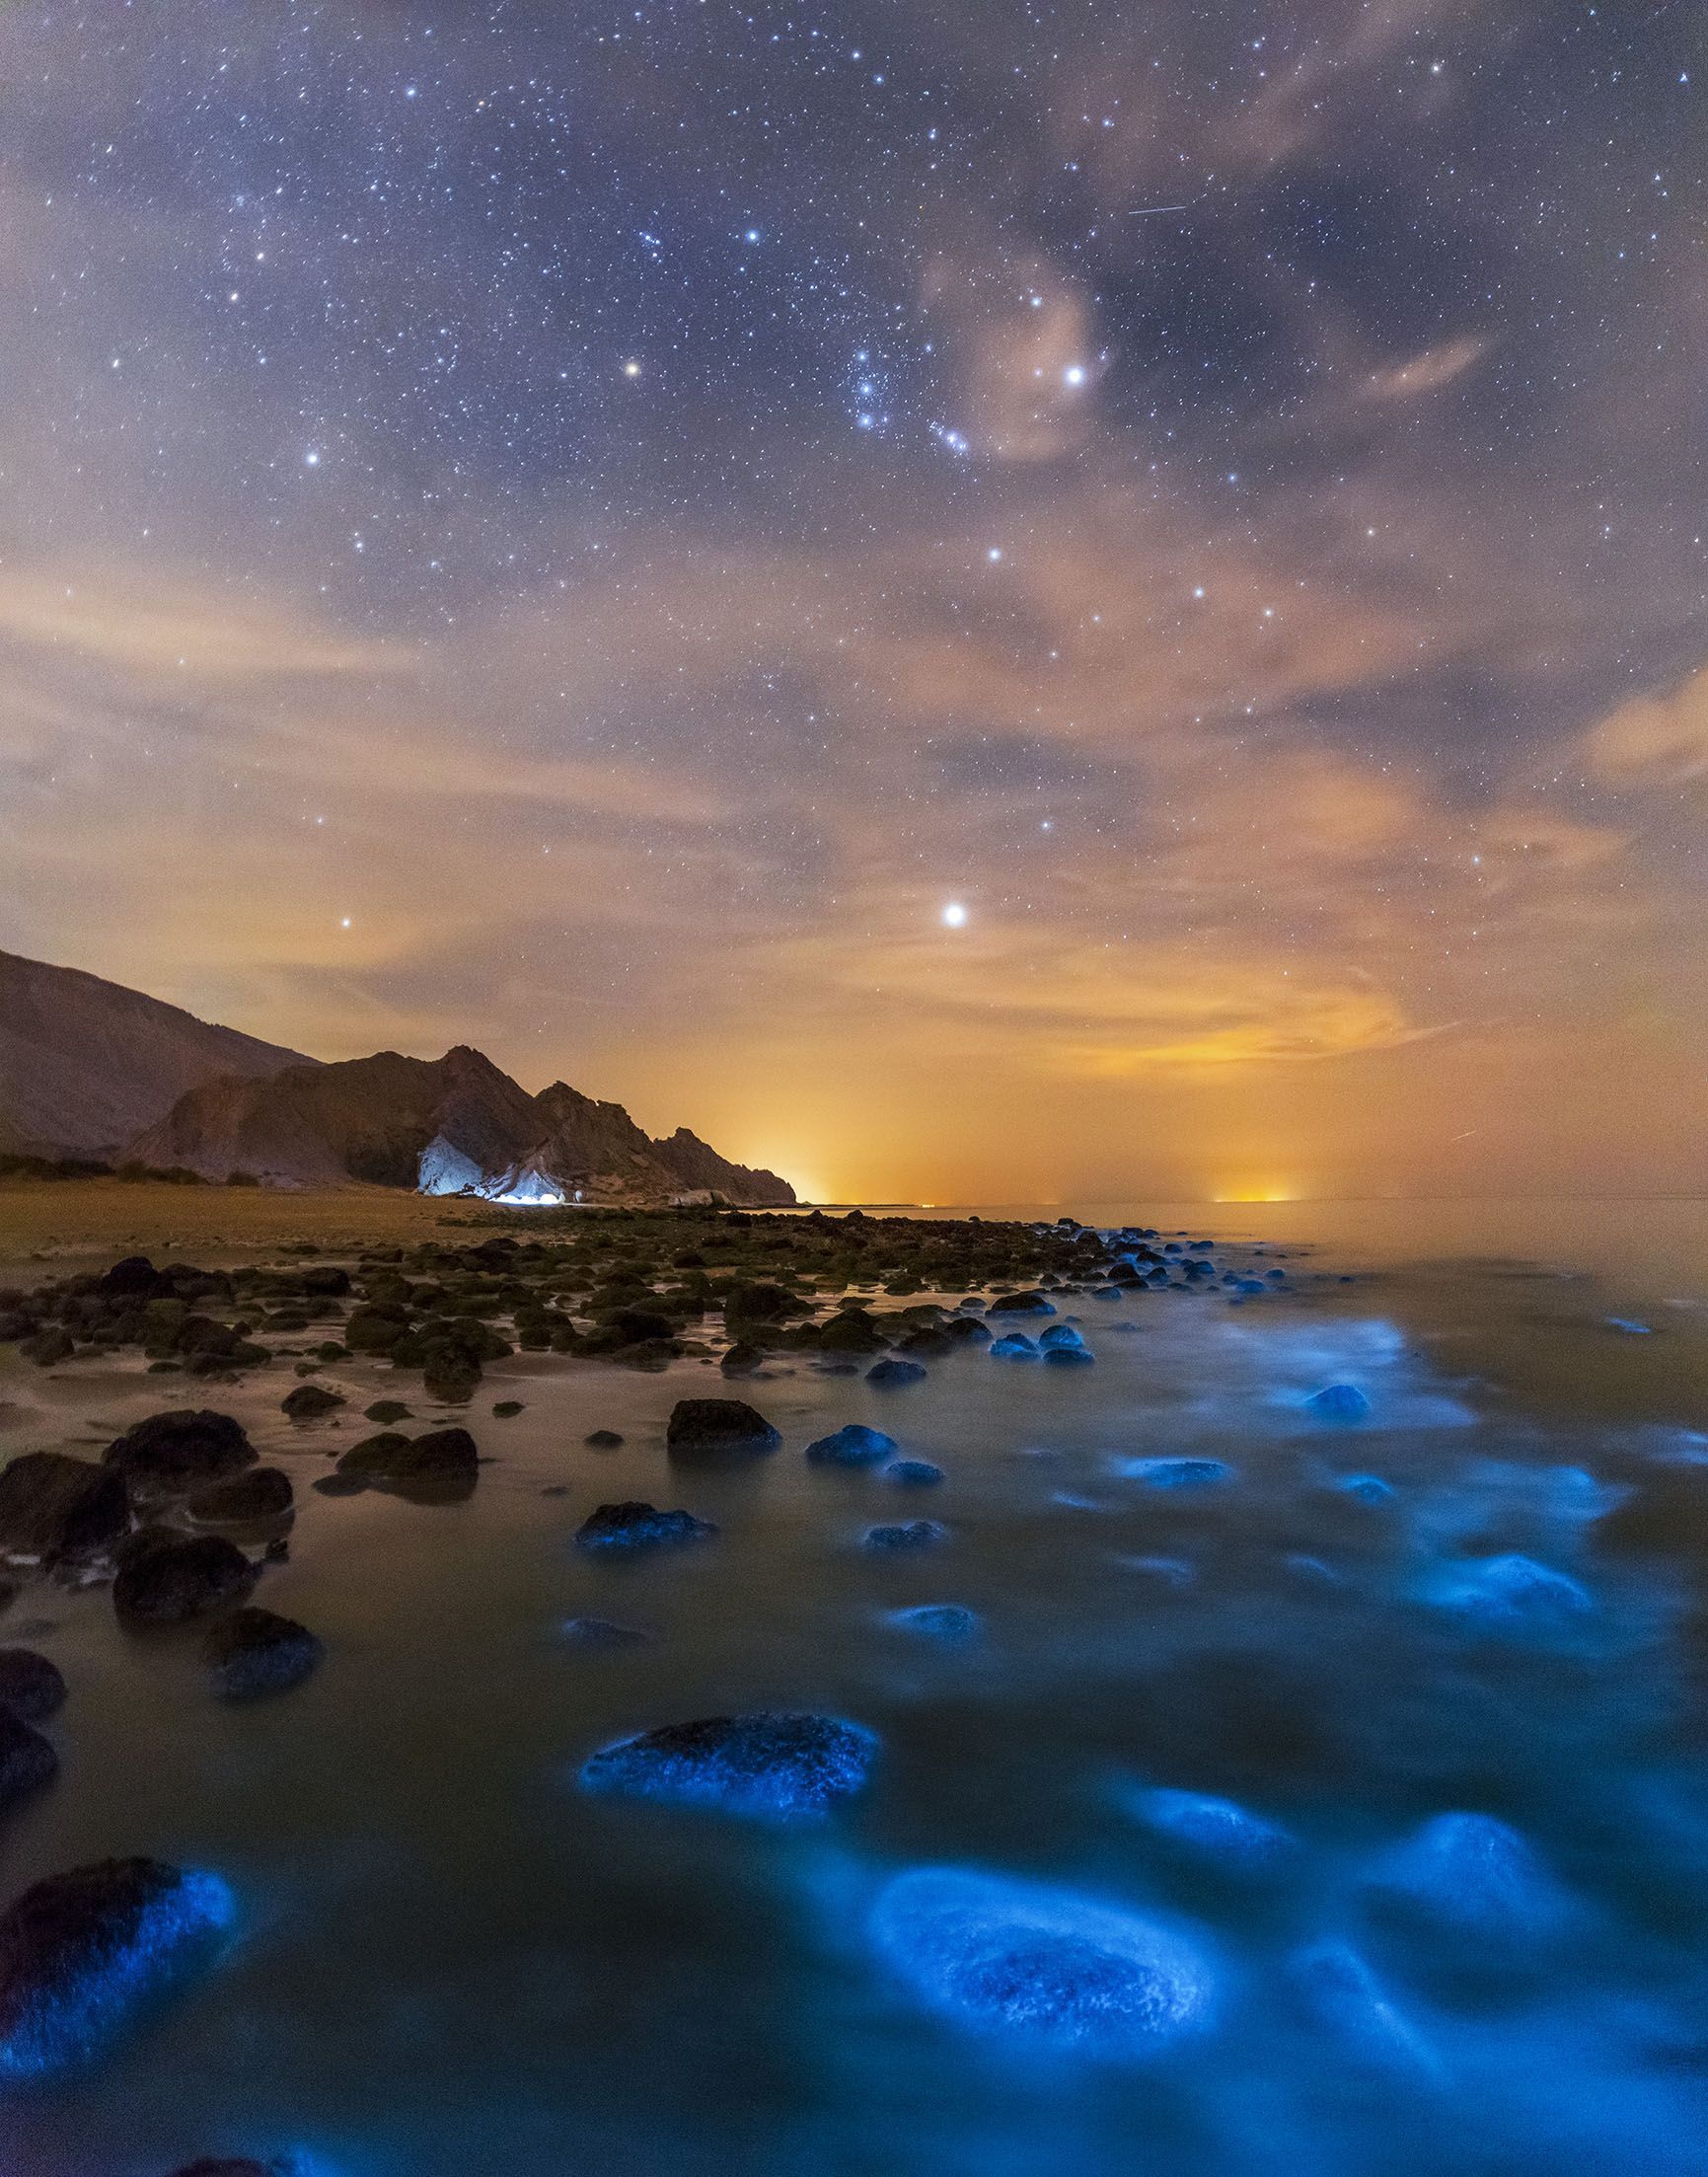 Bioluminescent Phytoplankton in the Persian Gulf and Orion